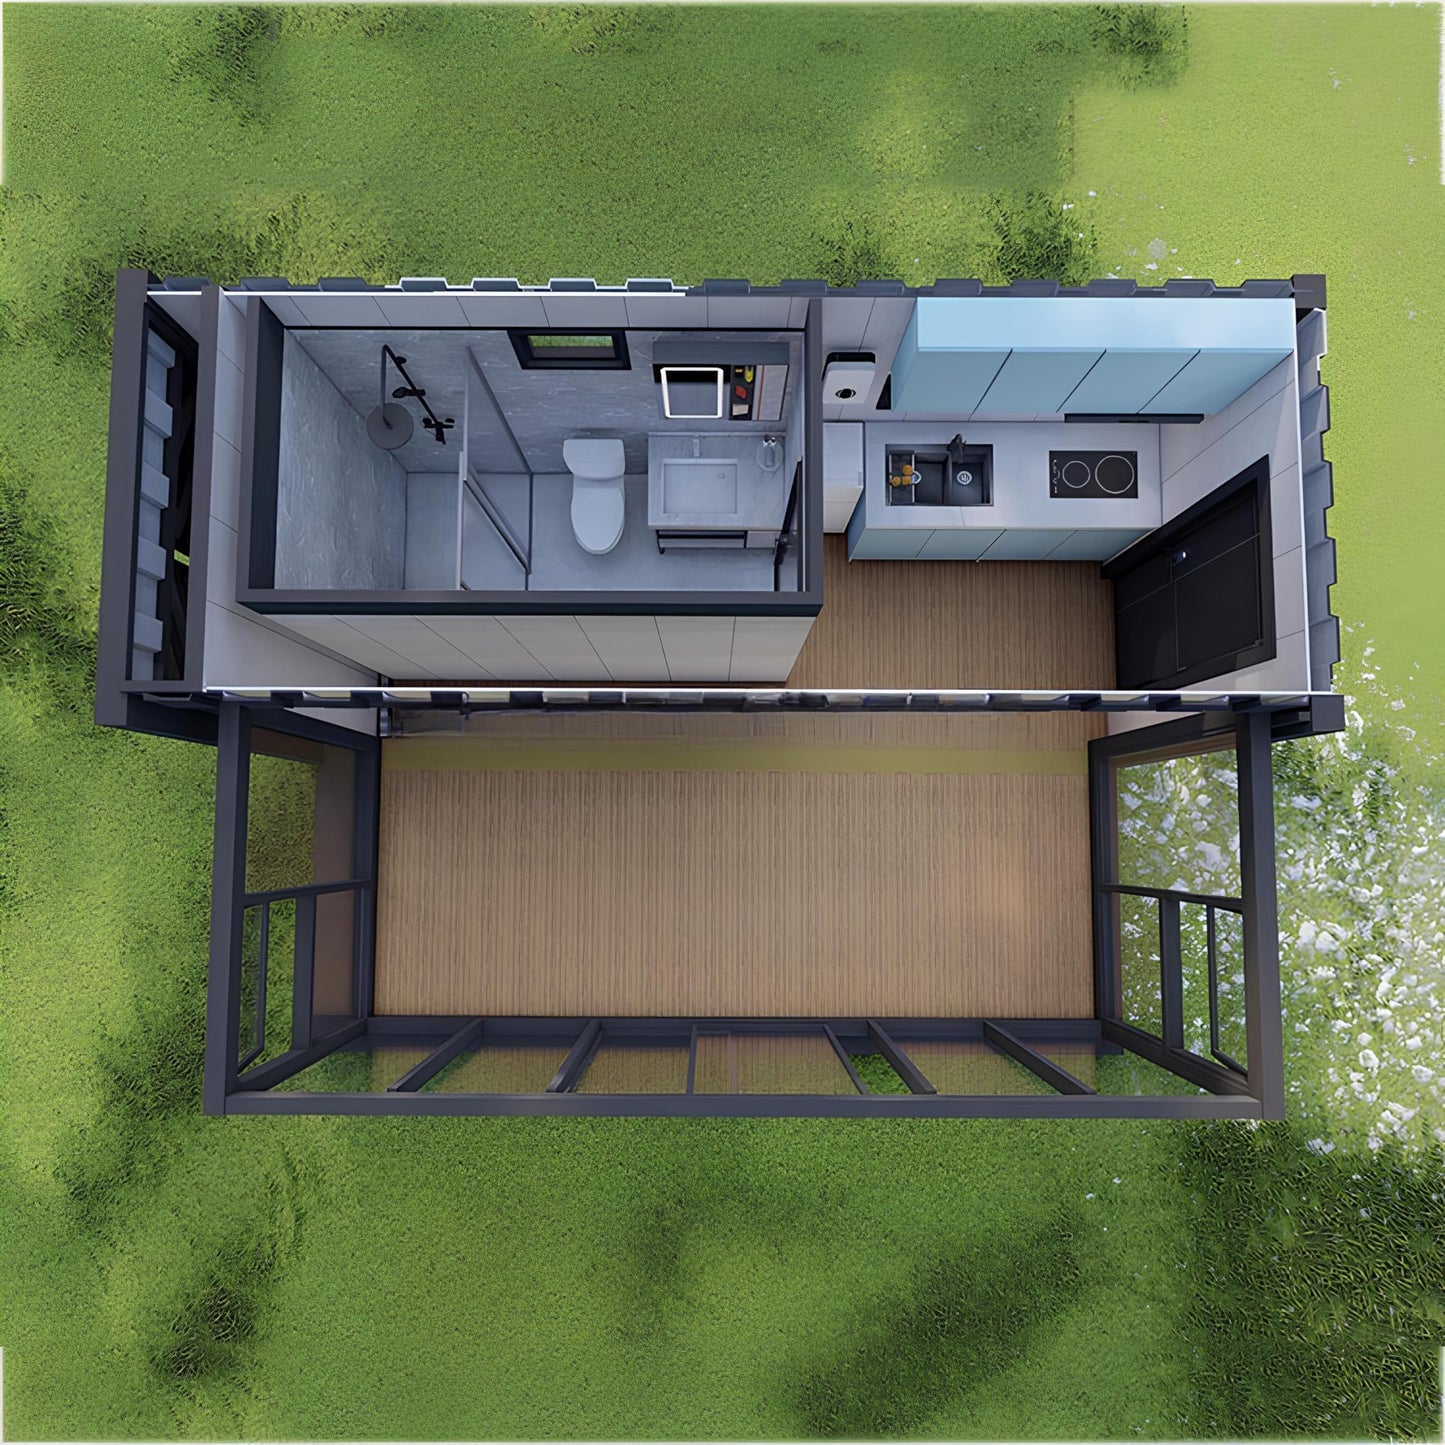 Prime Porch Prefab Tiny House for Sale: Eco-Friendly Modular Container Home 20ft - Compact, Foldable, and SmartHome Equipped with Full Amenities - Ideal for Small Houses, Portable Homes, Mobile Living